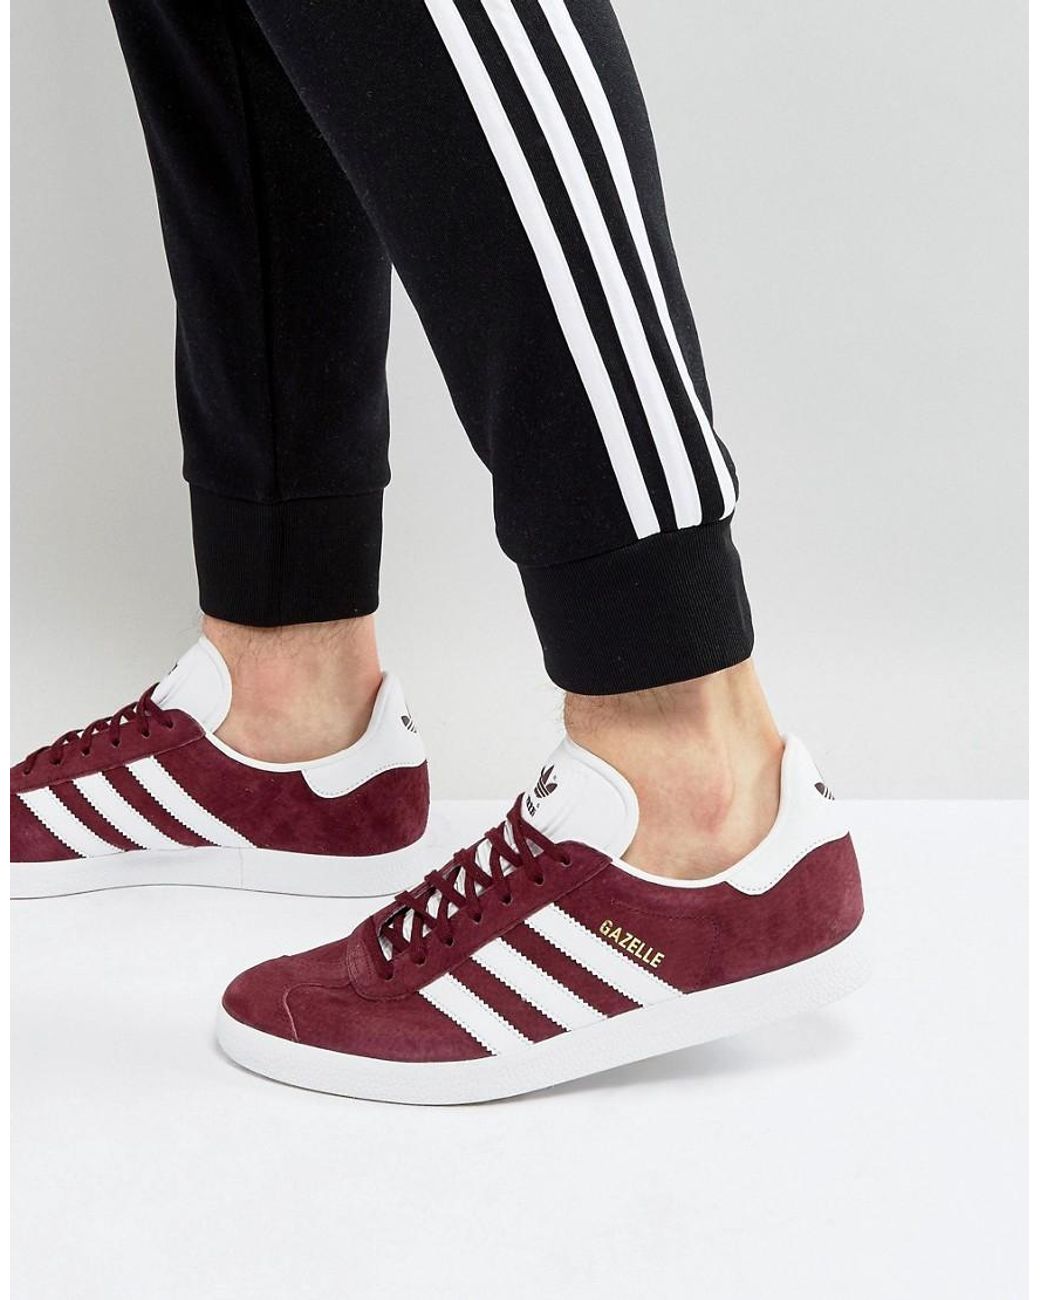 adidas burgundy gazelle suede trainers for Sale OFF 70%